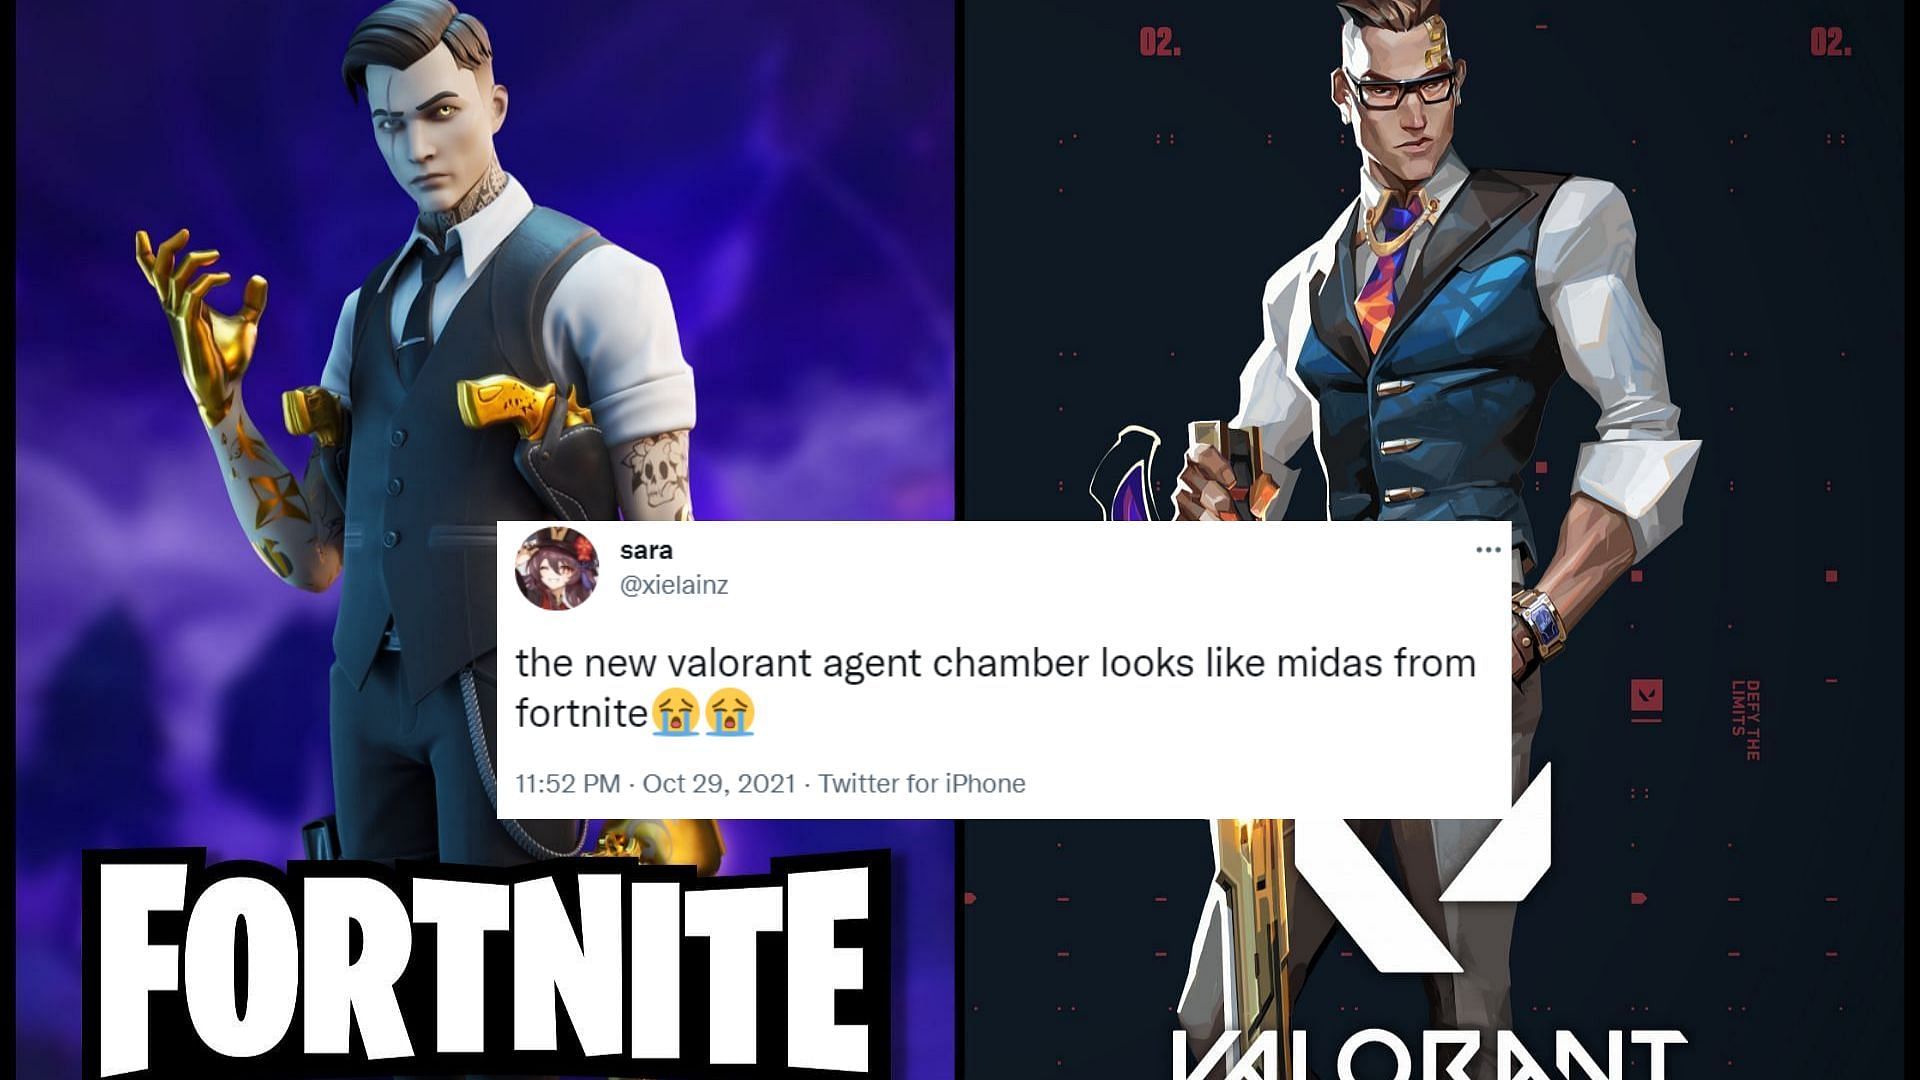 Twitter explodes with memes due to Valorant&#039;s Chamber&#039;s resemblance with Fortnite&#039;s Midas (Image via Sportskeeda)